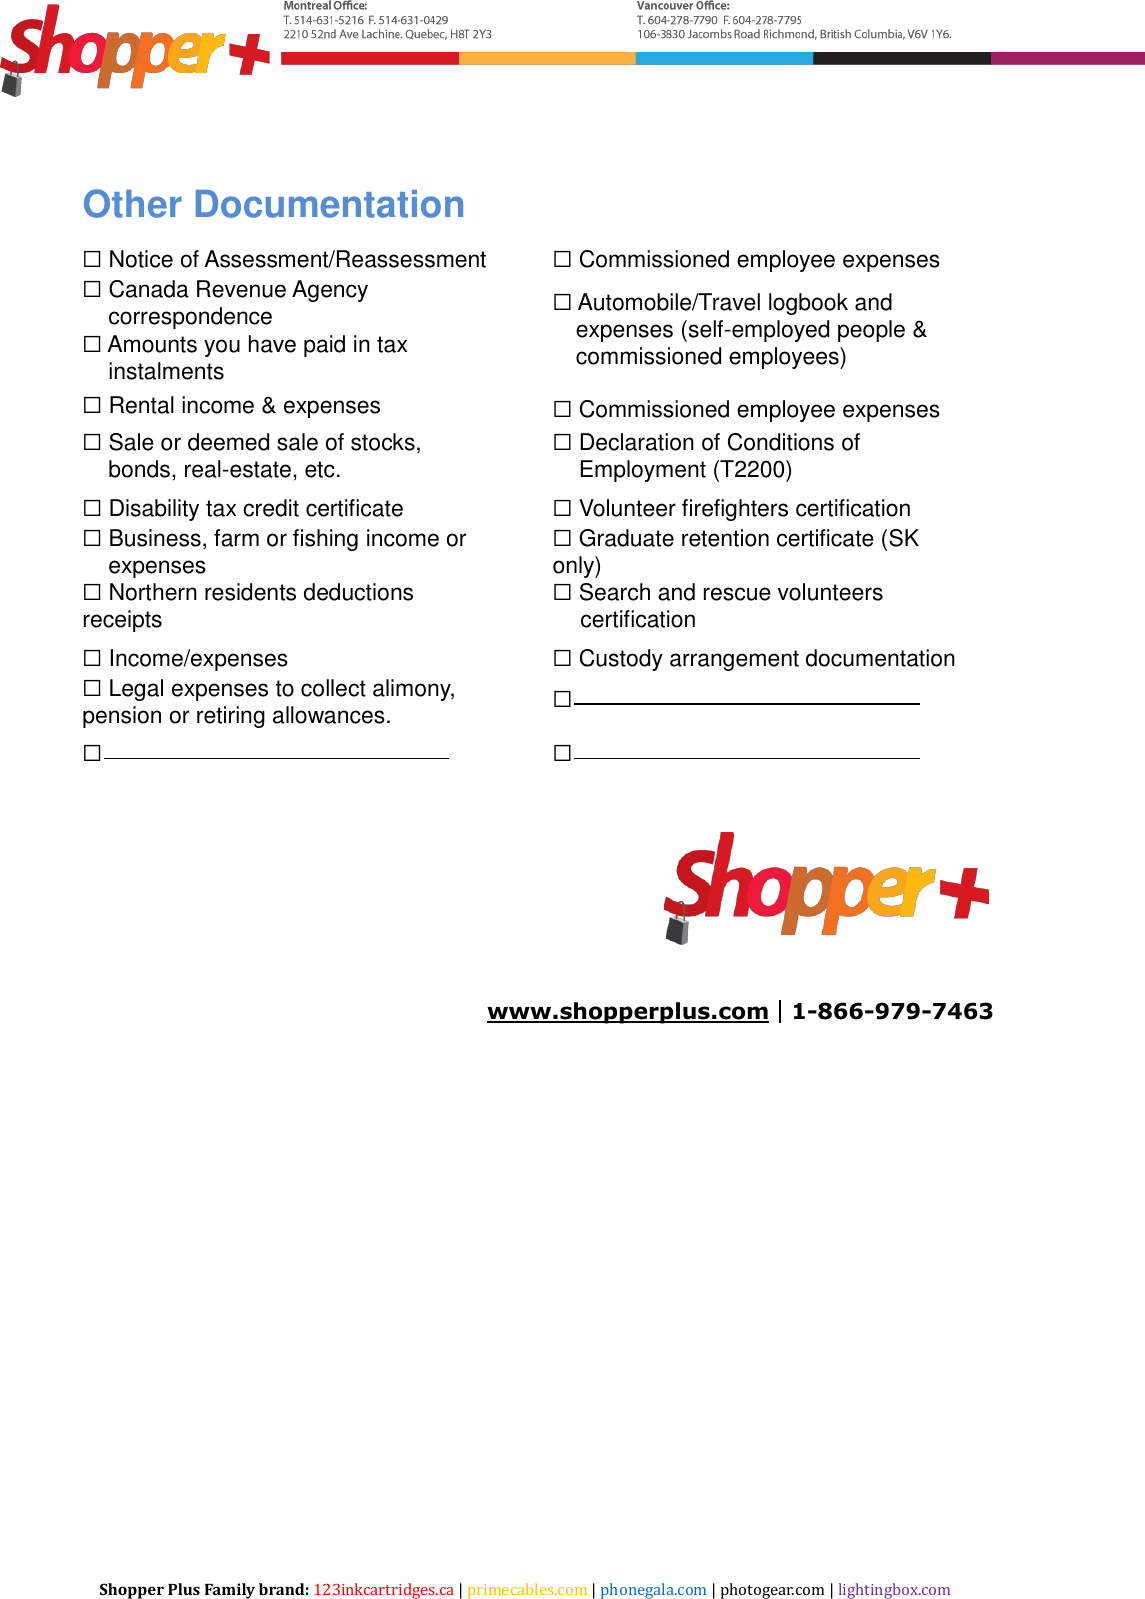 Page 2 of 2 - Printable Canadian Tax Checklist